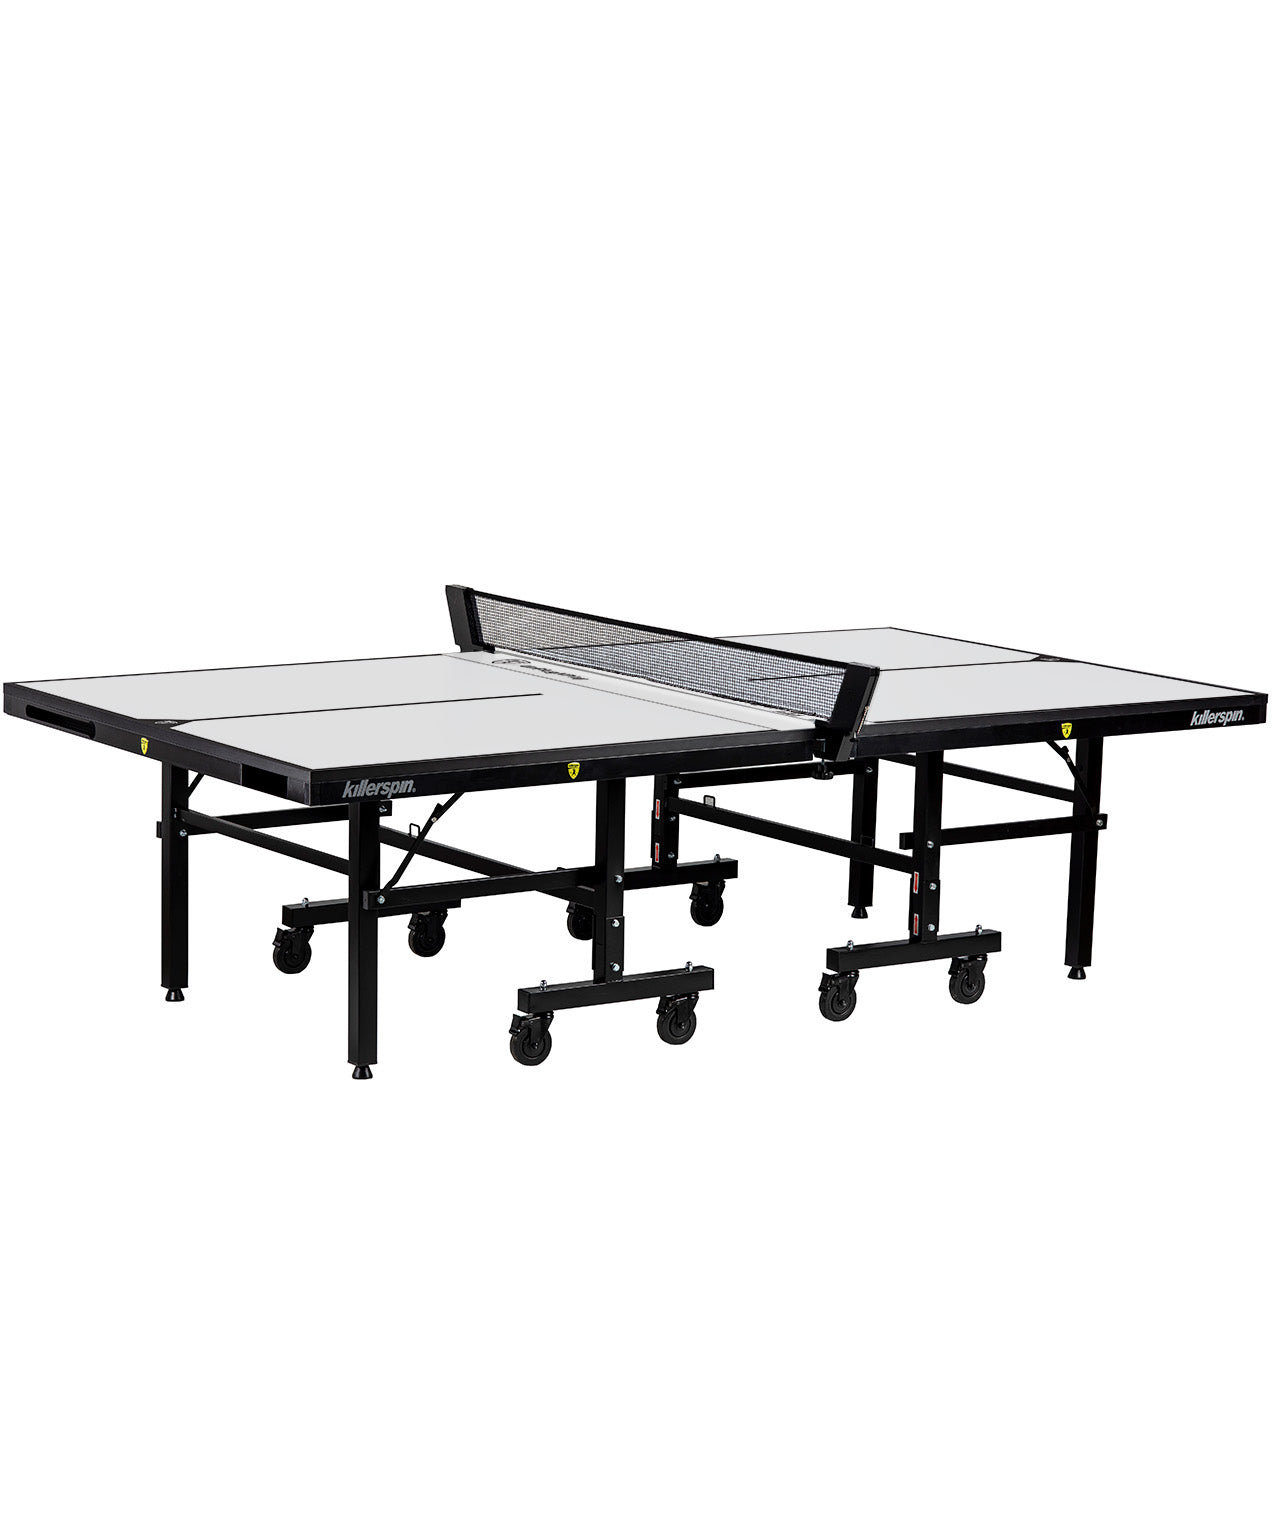 Killerspin Indoor Ping Pong Table UnPlugNPlay415 Max Vanilla Black frame White top model 2020